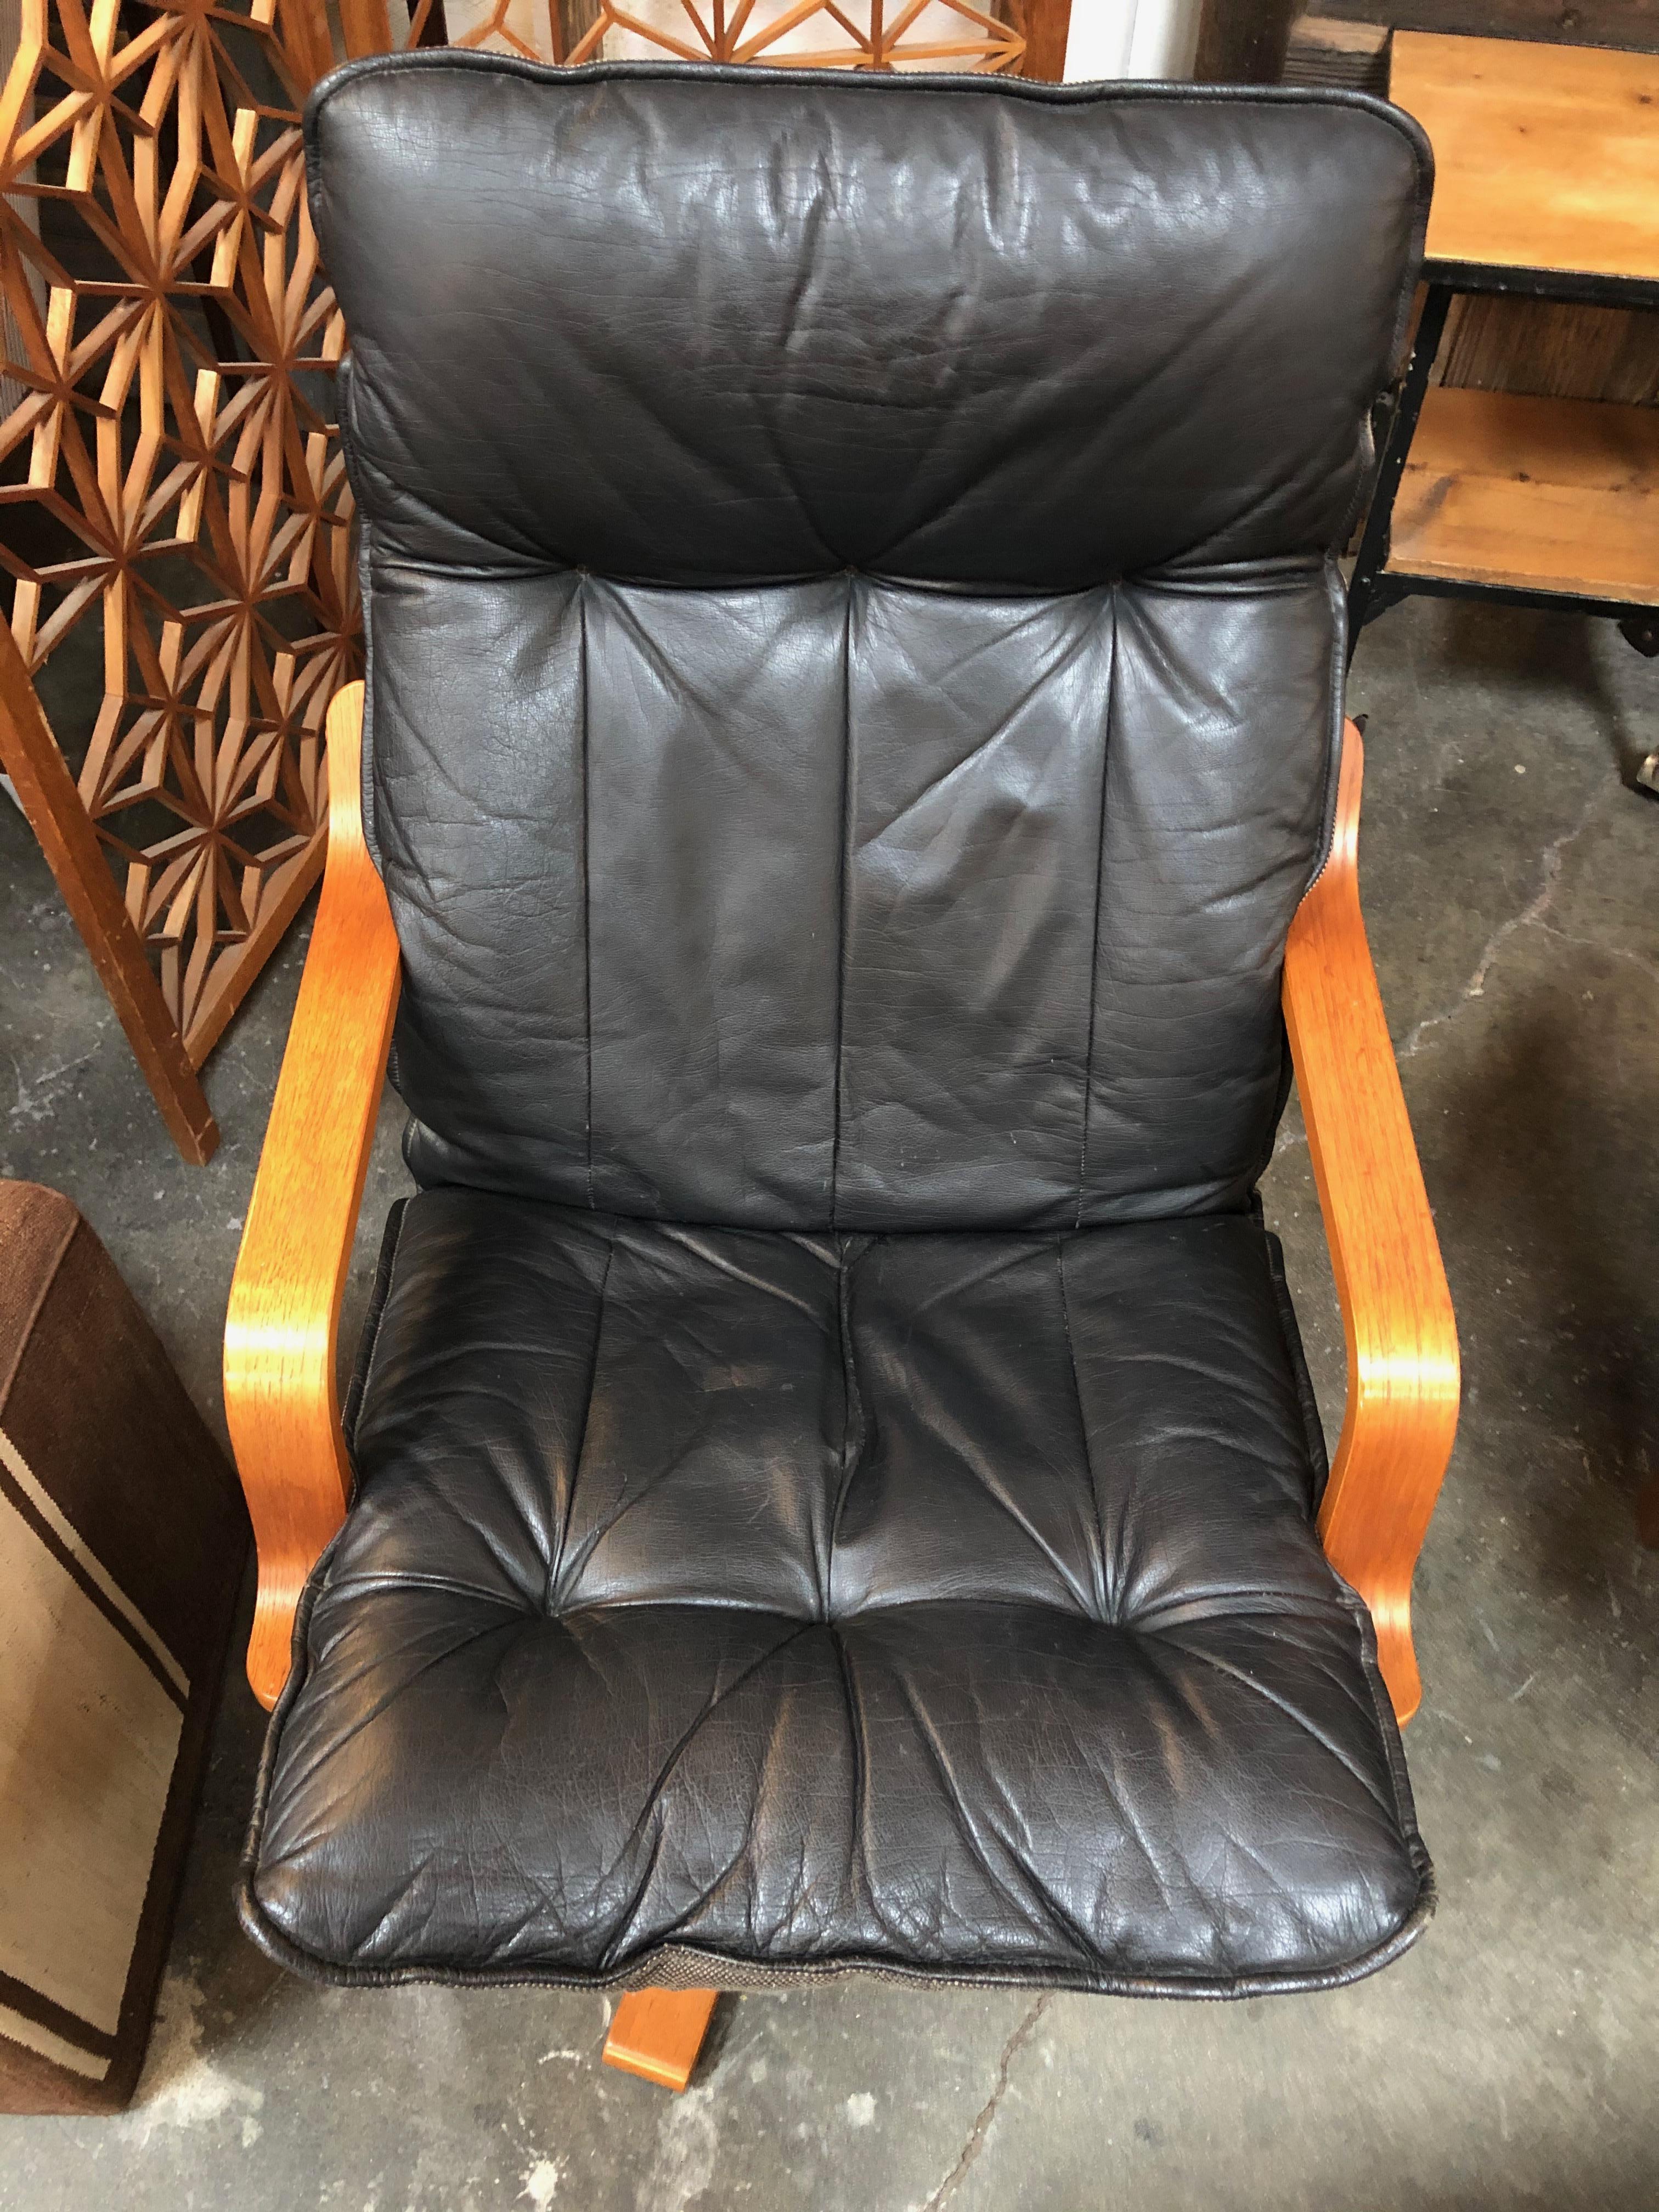 1970s Kebe leather lounge chair, made in Denmark. Swivels and reclines, includes cloth backing and teak bentwood support. Has notch to help change recline beneath seat.